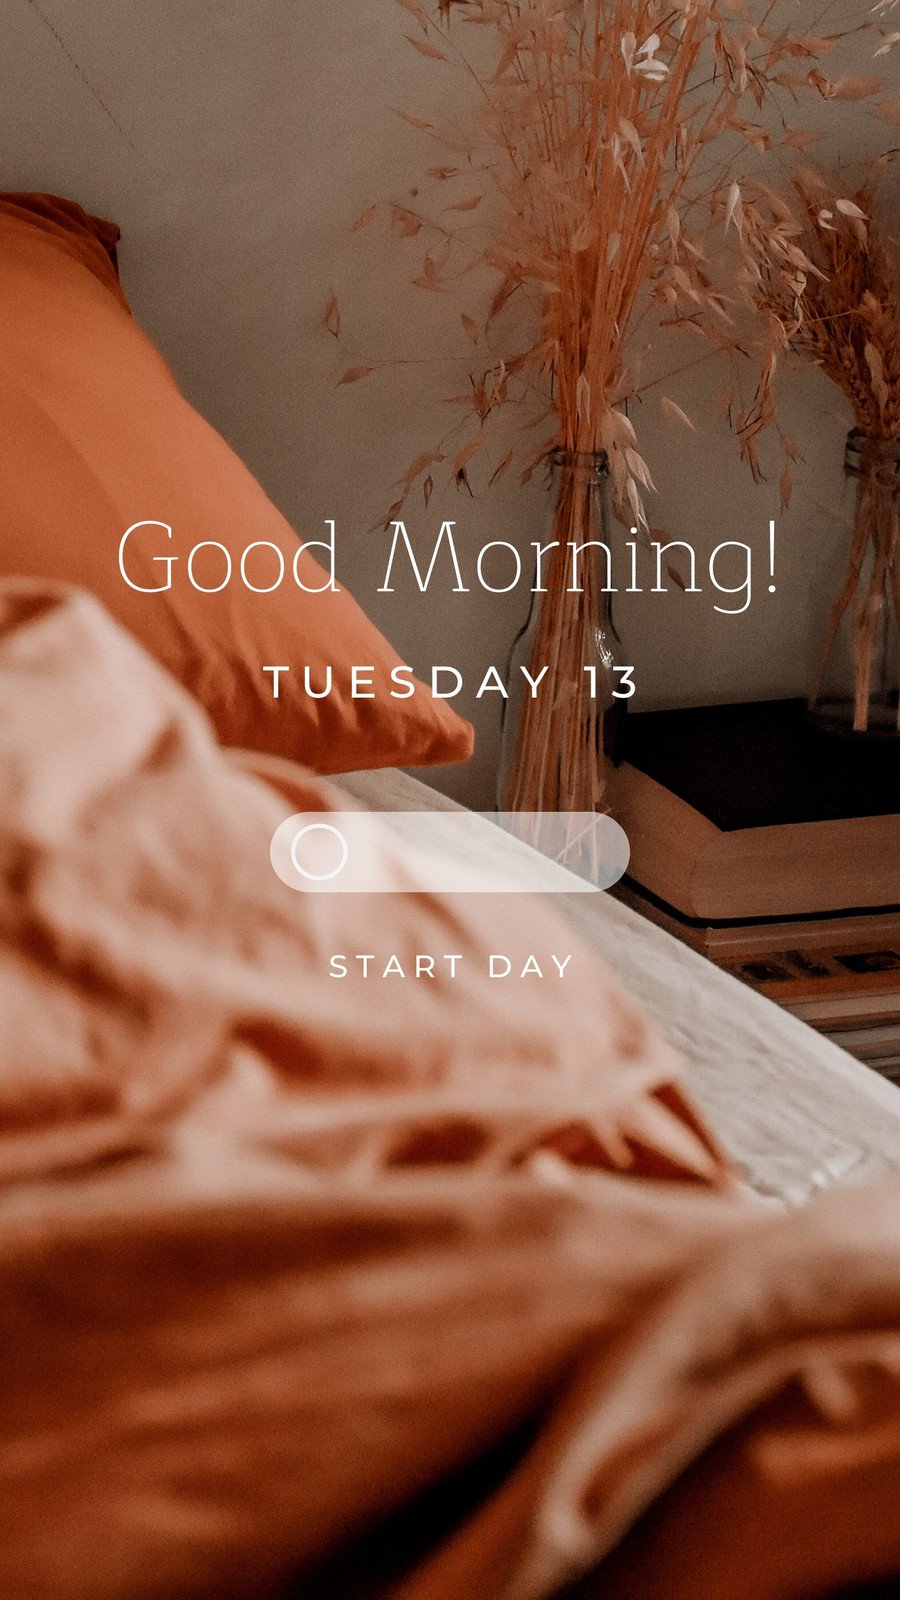 Page 21 - Free and customizable good morning wallpaper templates